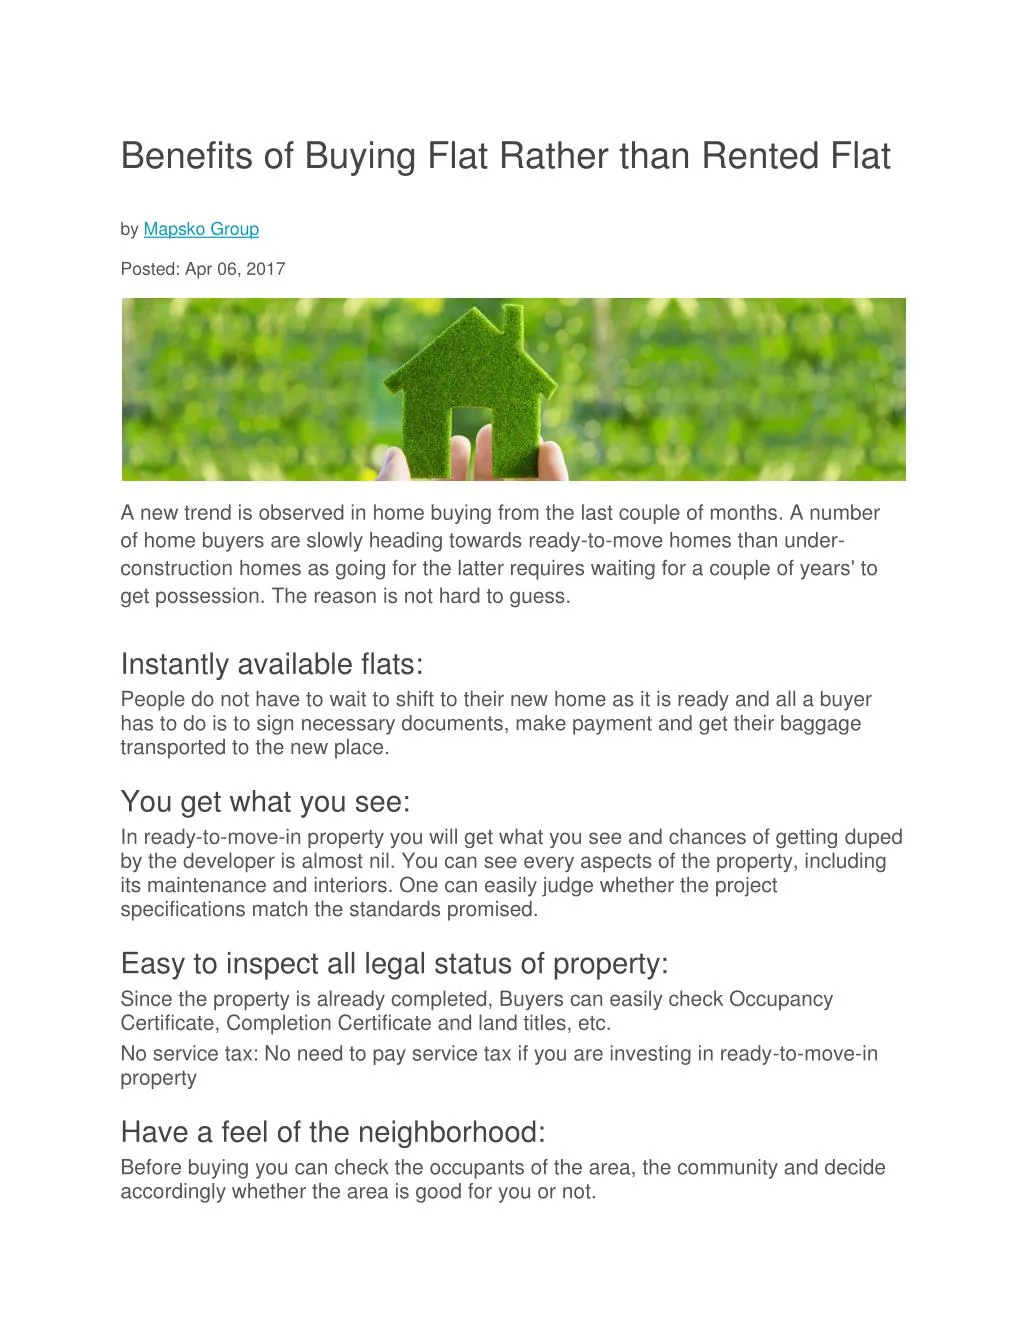 benefits of buying flat rather than rented flat